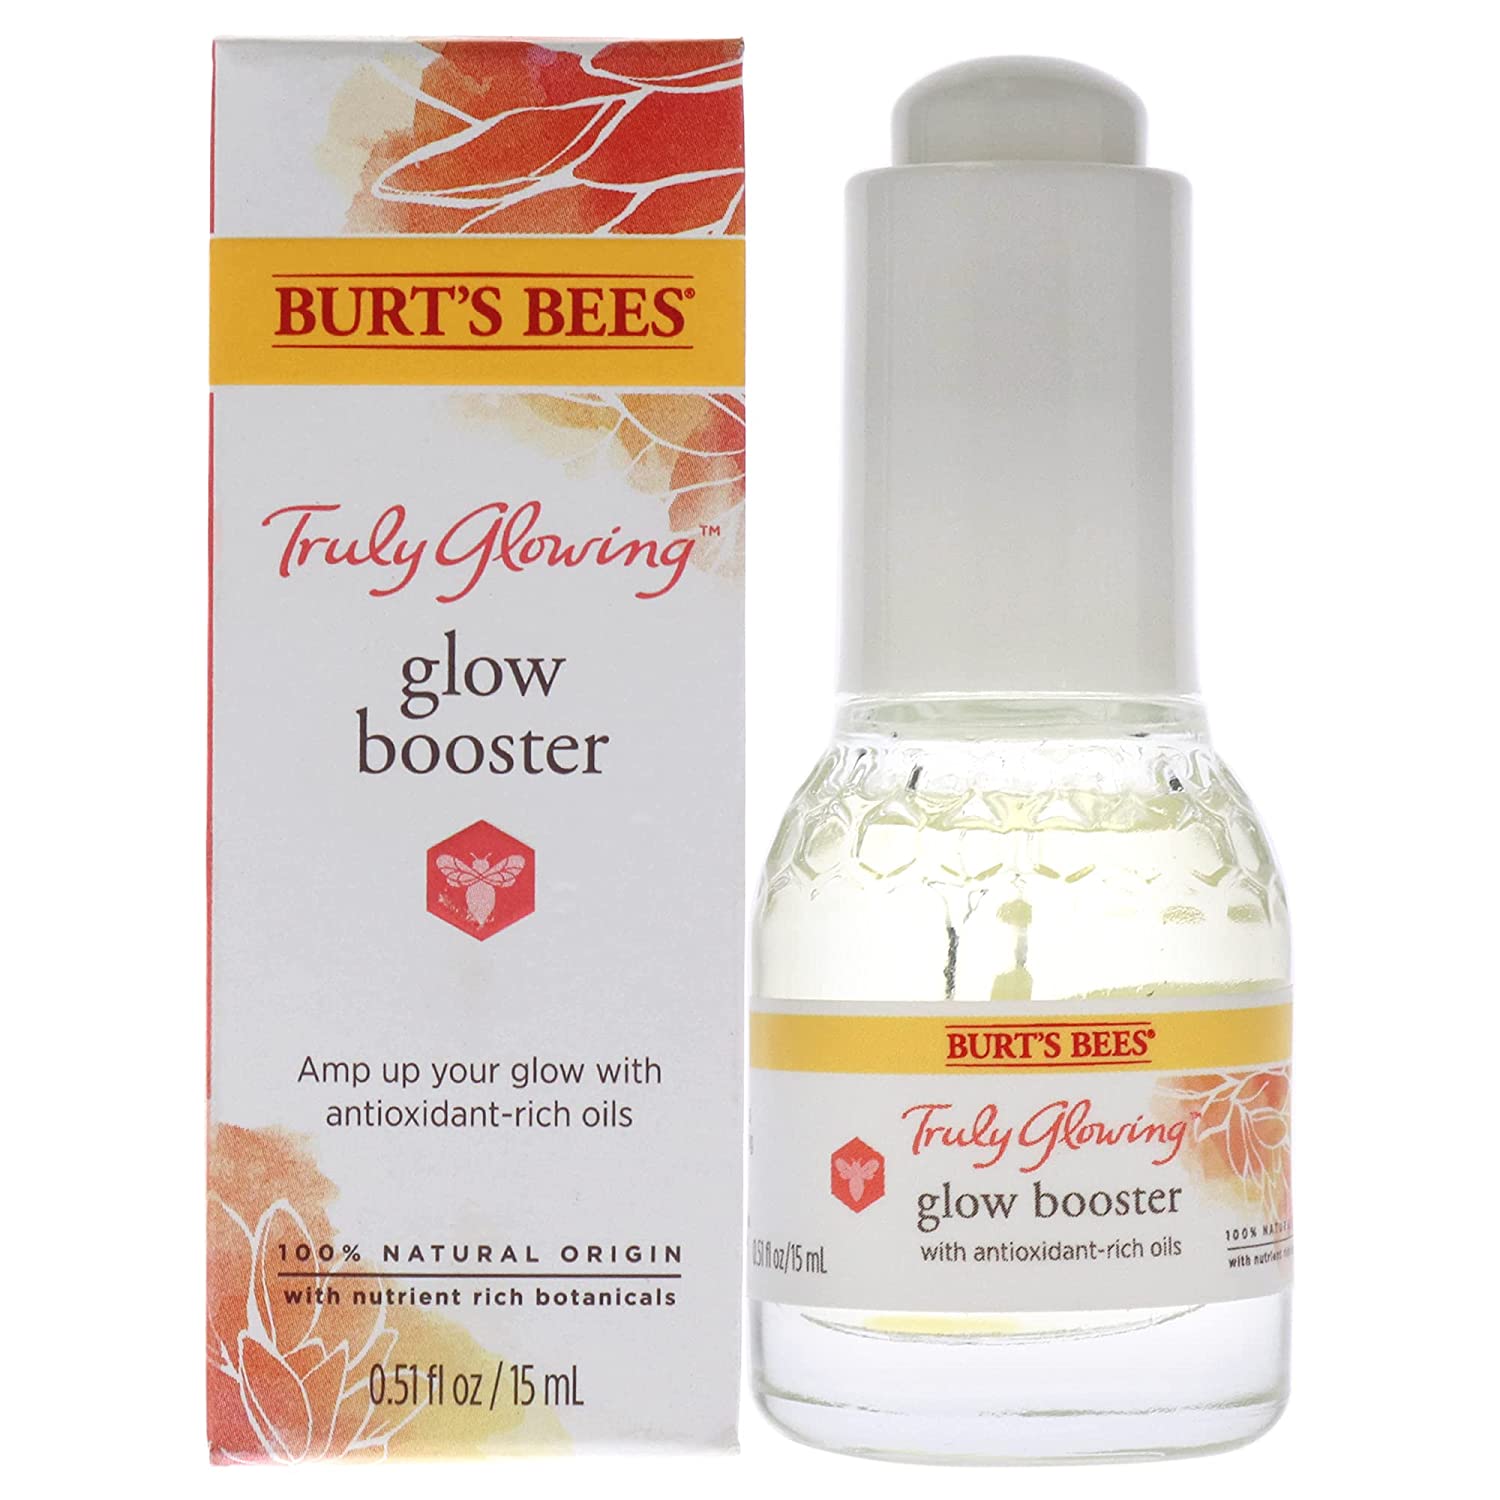 Burt's Bees Glow Booster Face Serum with Antioxidant-Rich Oils for Normal and Combination Skin, 0.51 oz